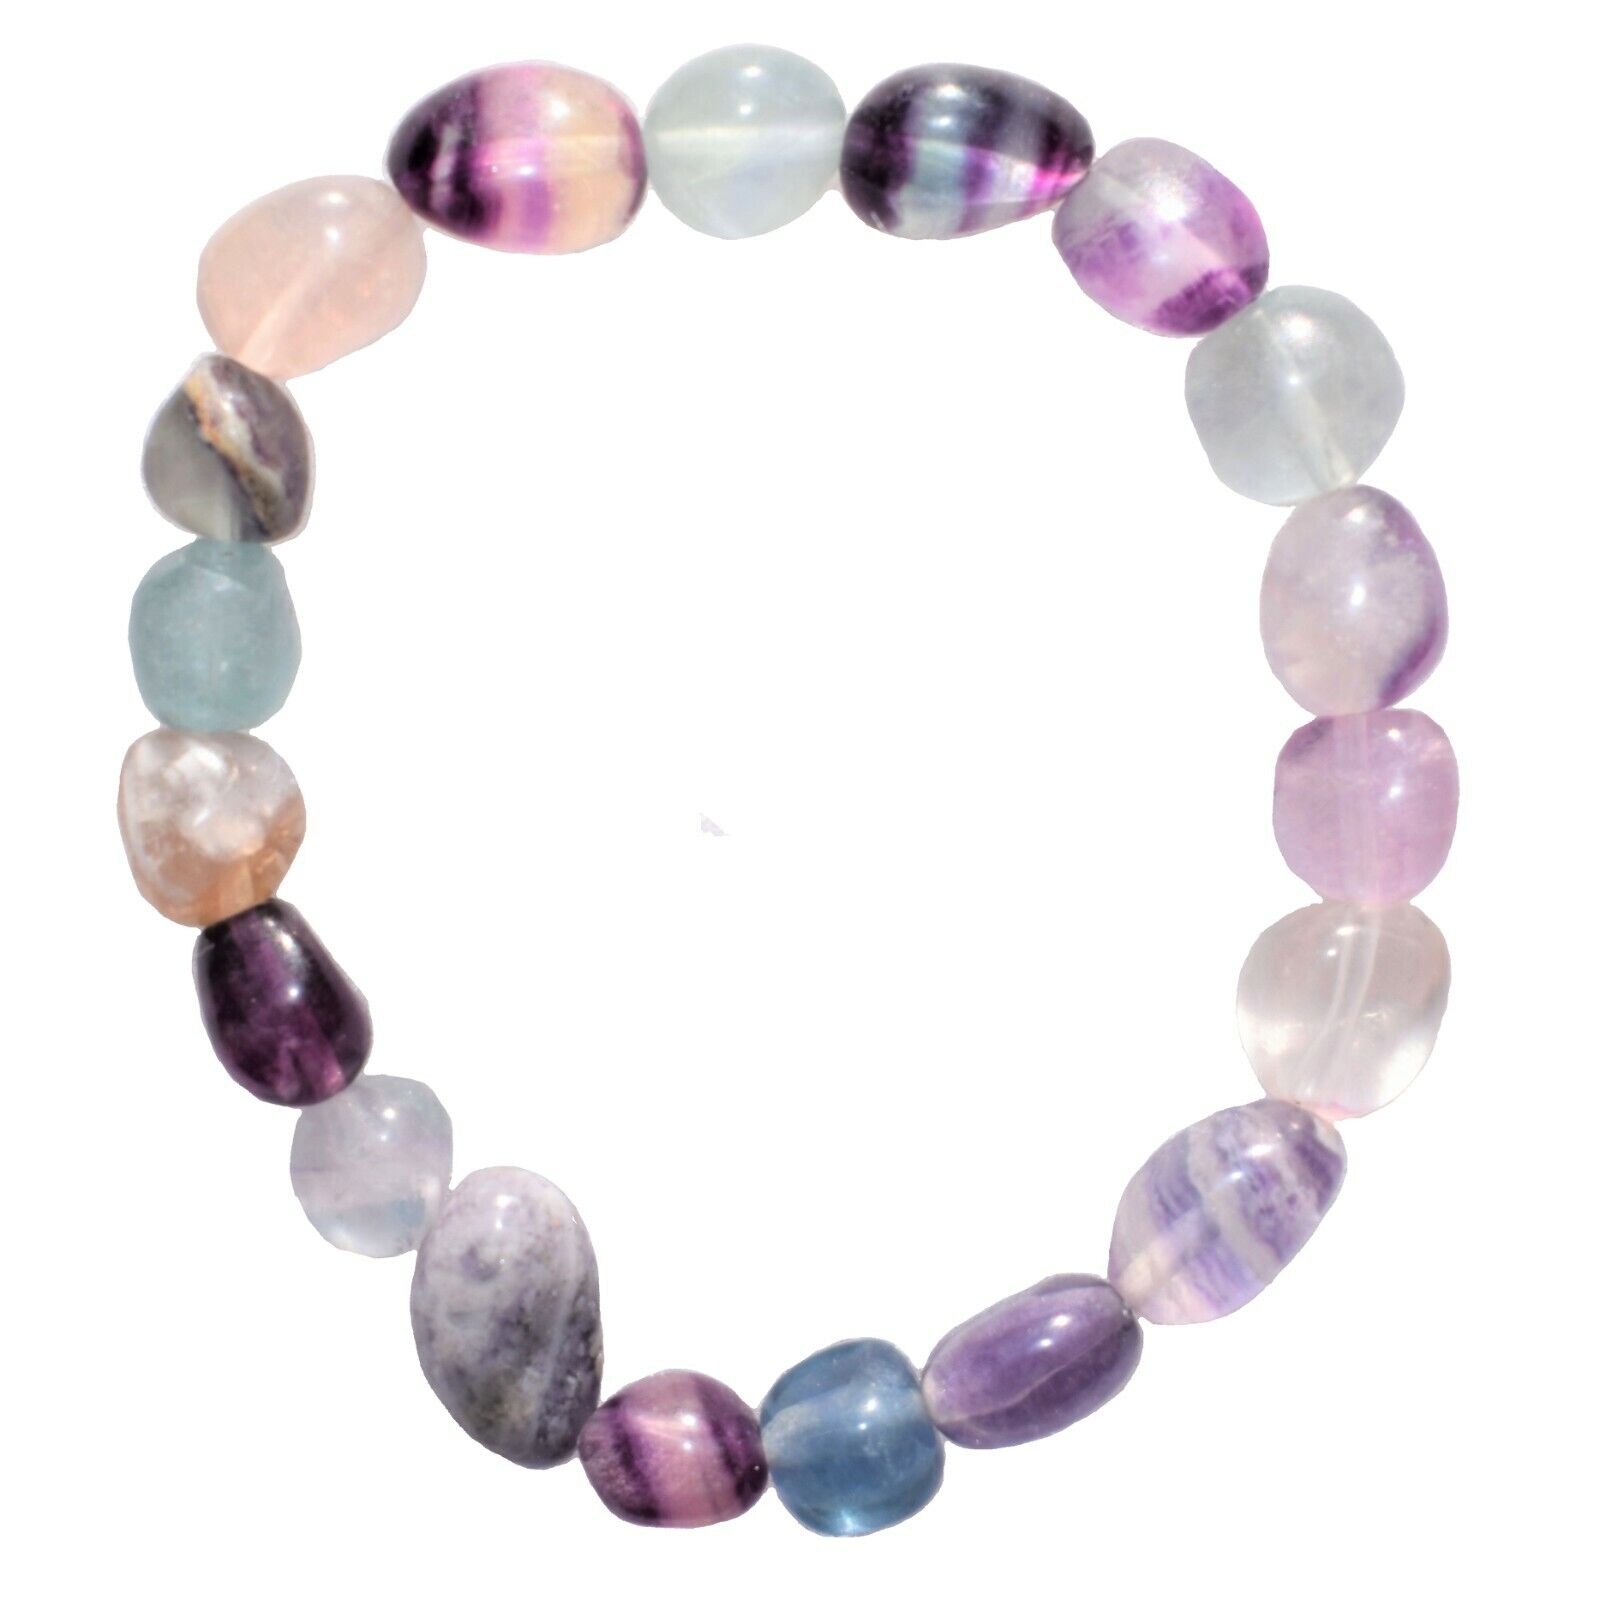 CHARGED Rainbow Fluorite Crystal Nugget Stretchy Bracelet + Selenite Puffy Heart